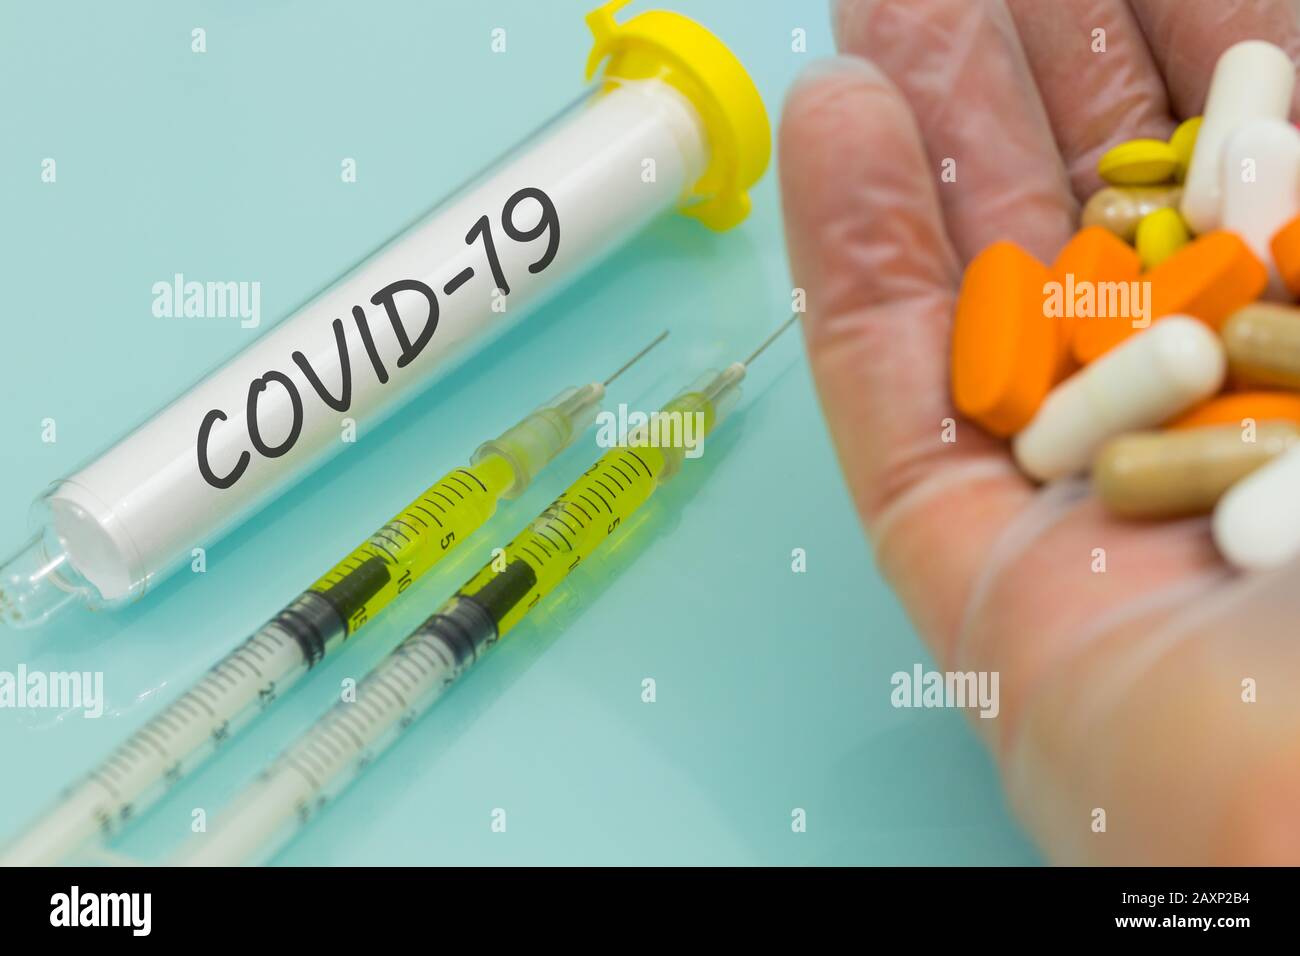 COVID-19 in a vial, hand in rubber glove with medication and injections. Concept of working on a virus vaccine Stock Photo